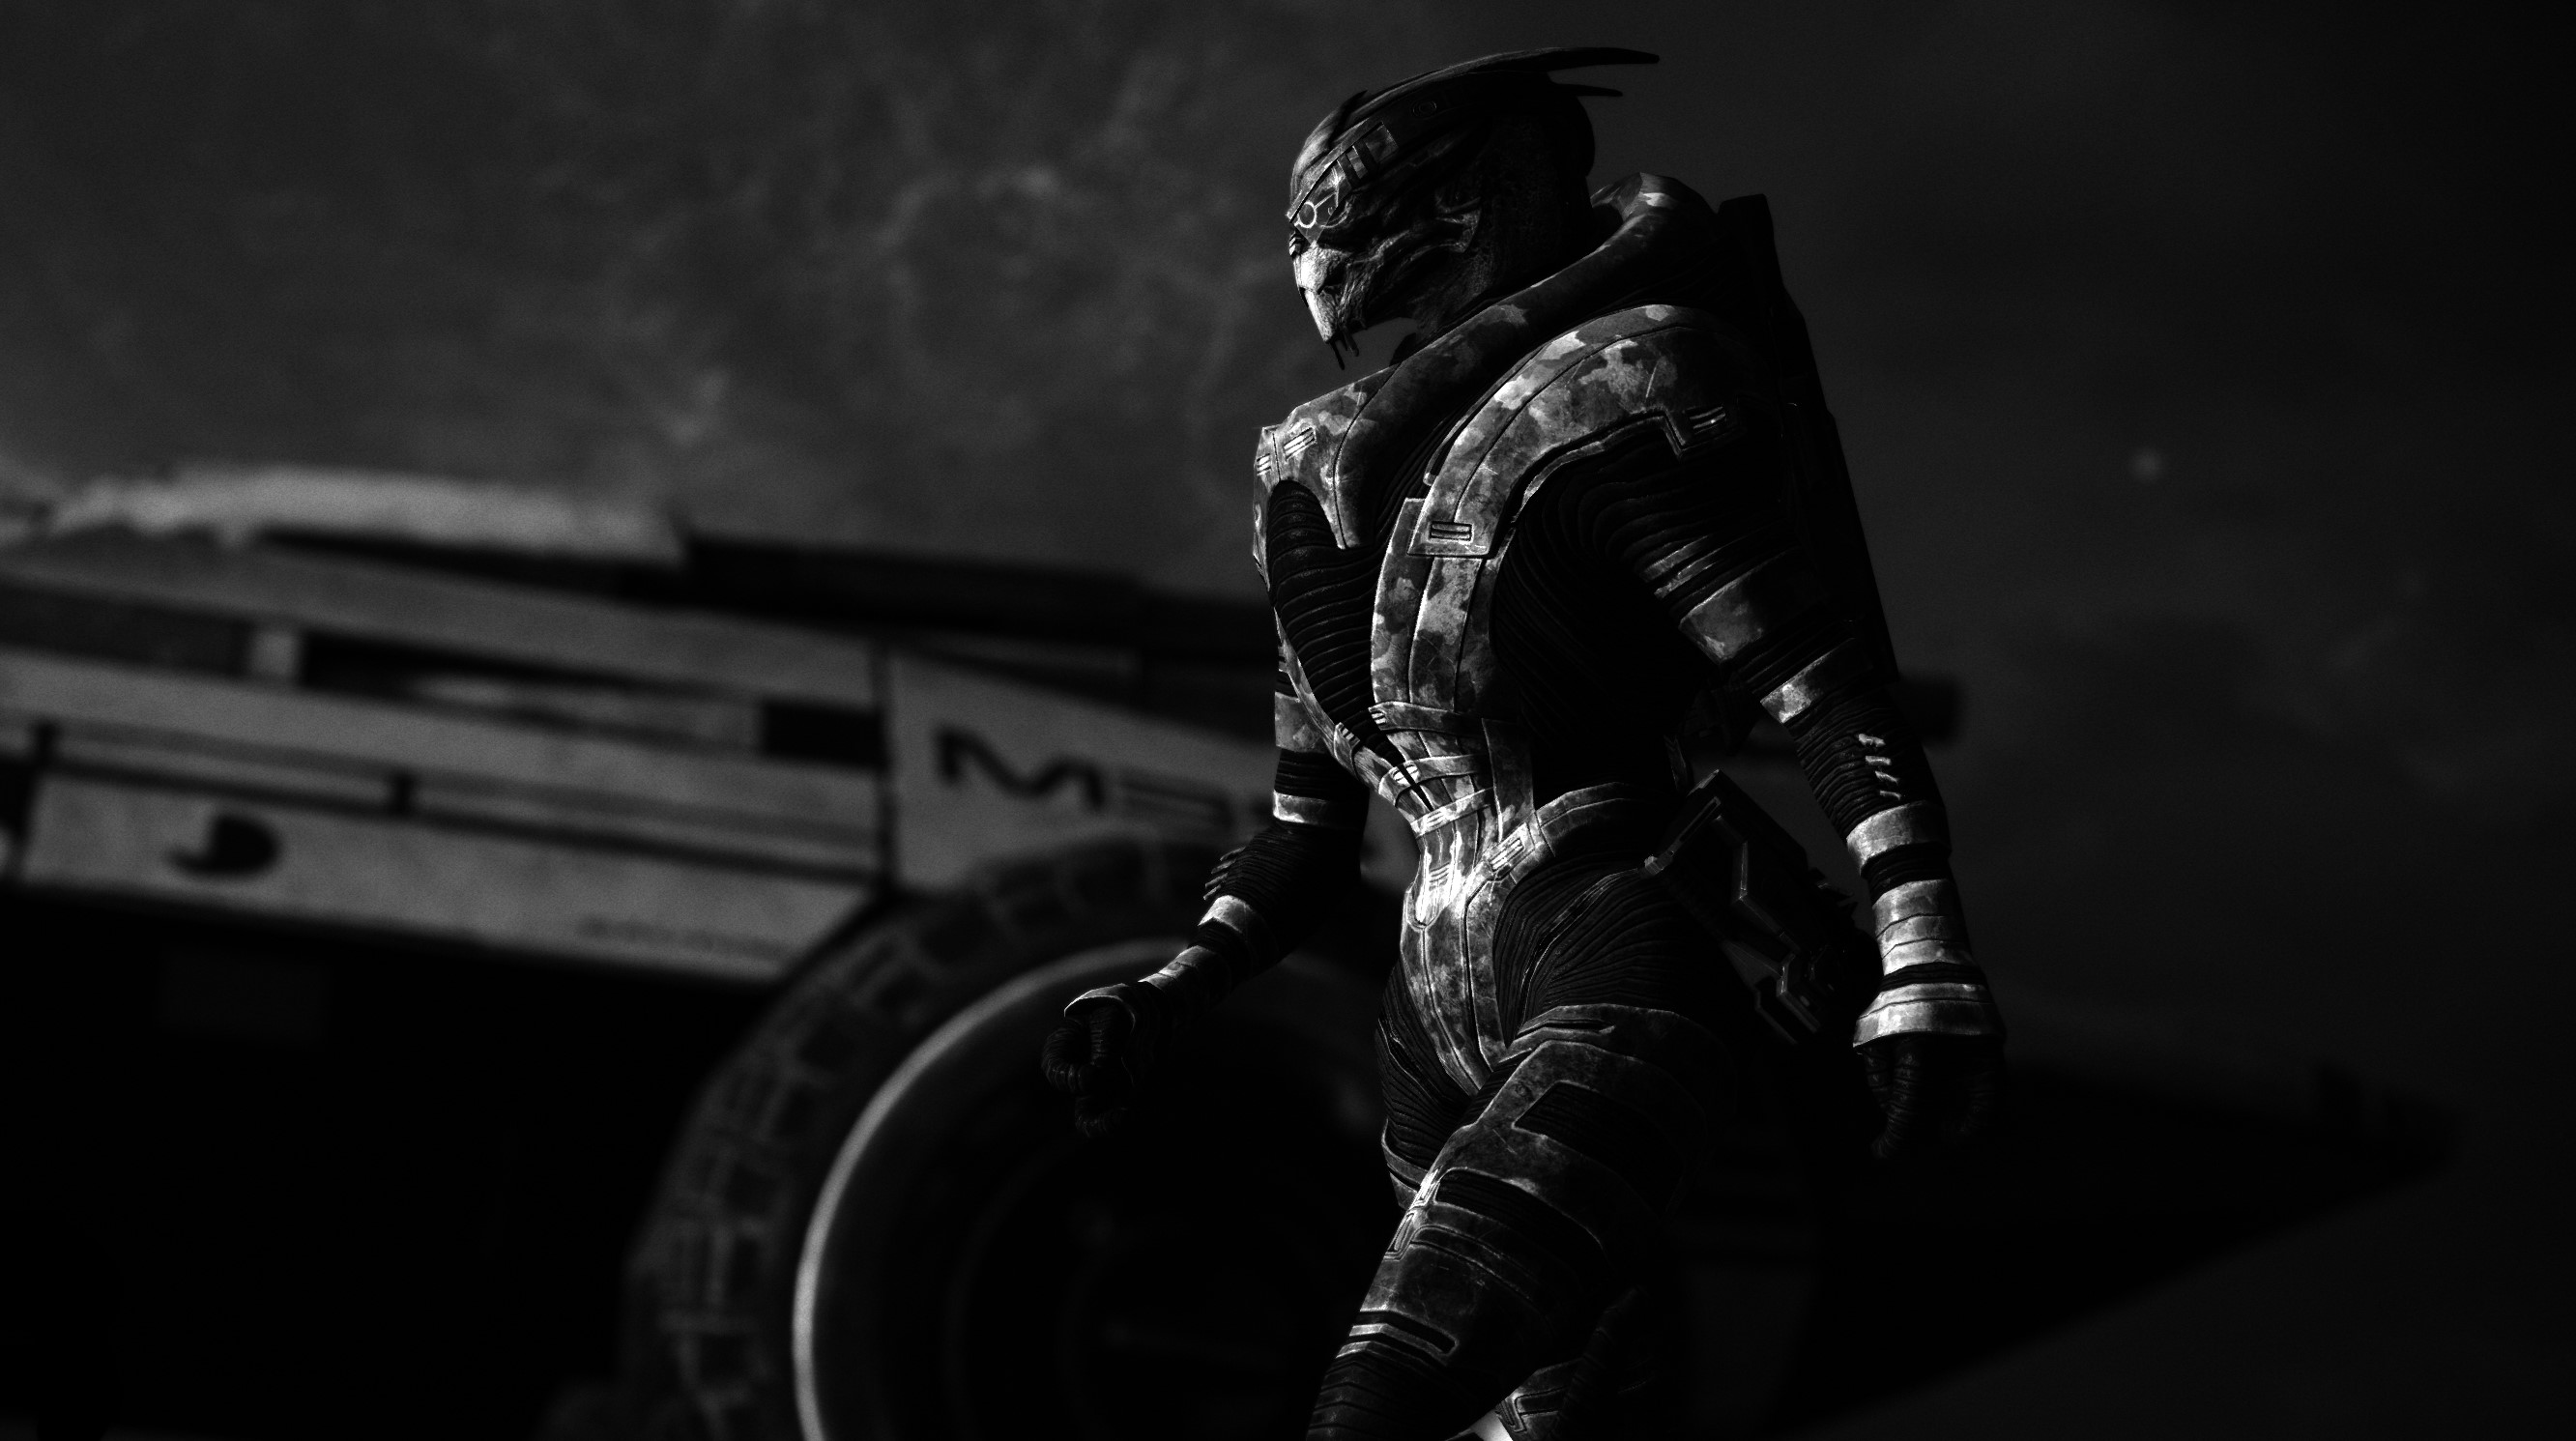  Mass Effect: Legendary Edition has a photo mode and it looks pretty sweet 